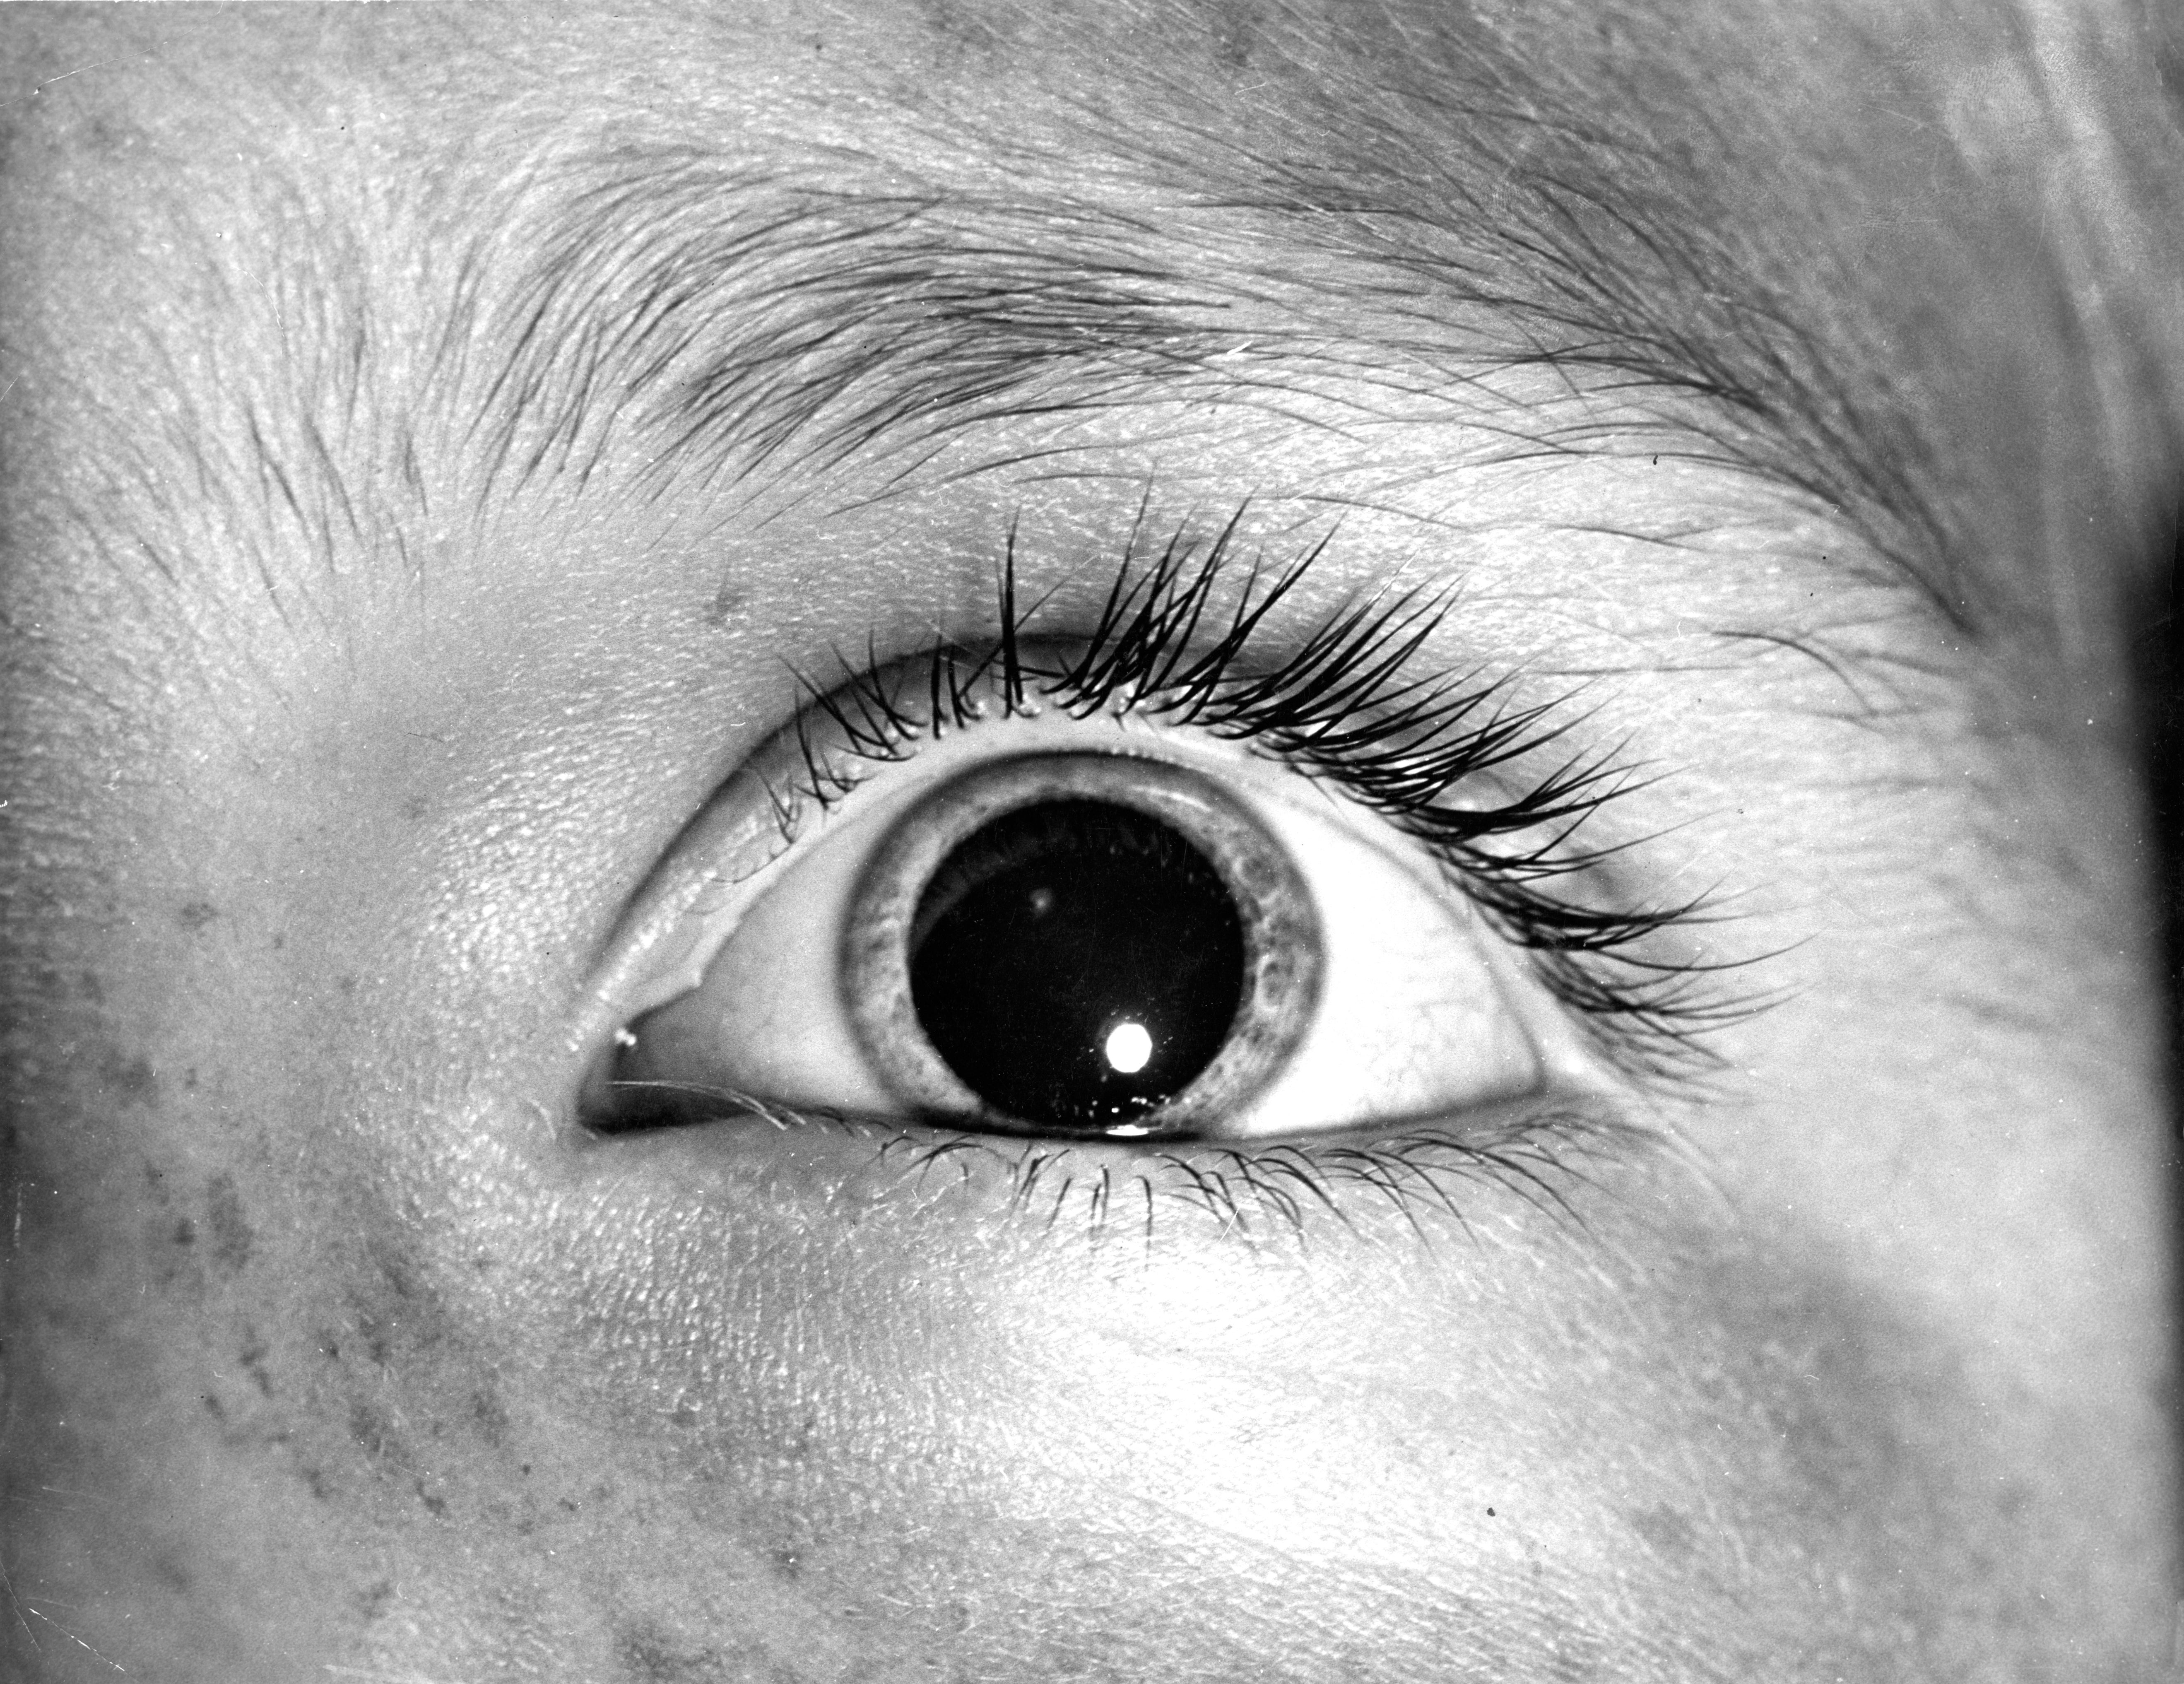 Cute Amateur Teen Orgasm - Eye-Opener: Why Do Pupils Dilate in Response to Emotional States? -  Scientific American